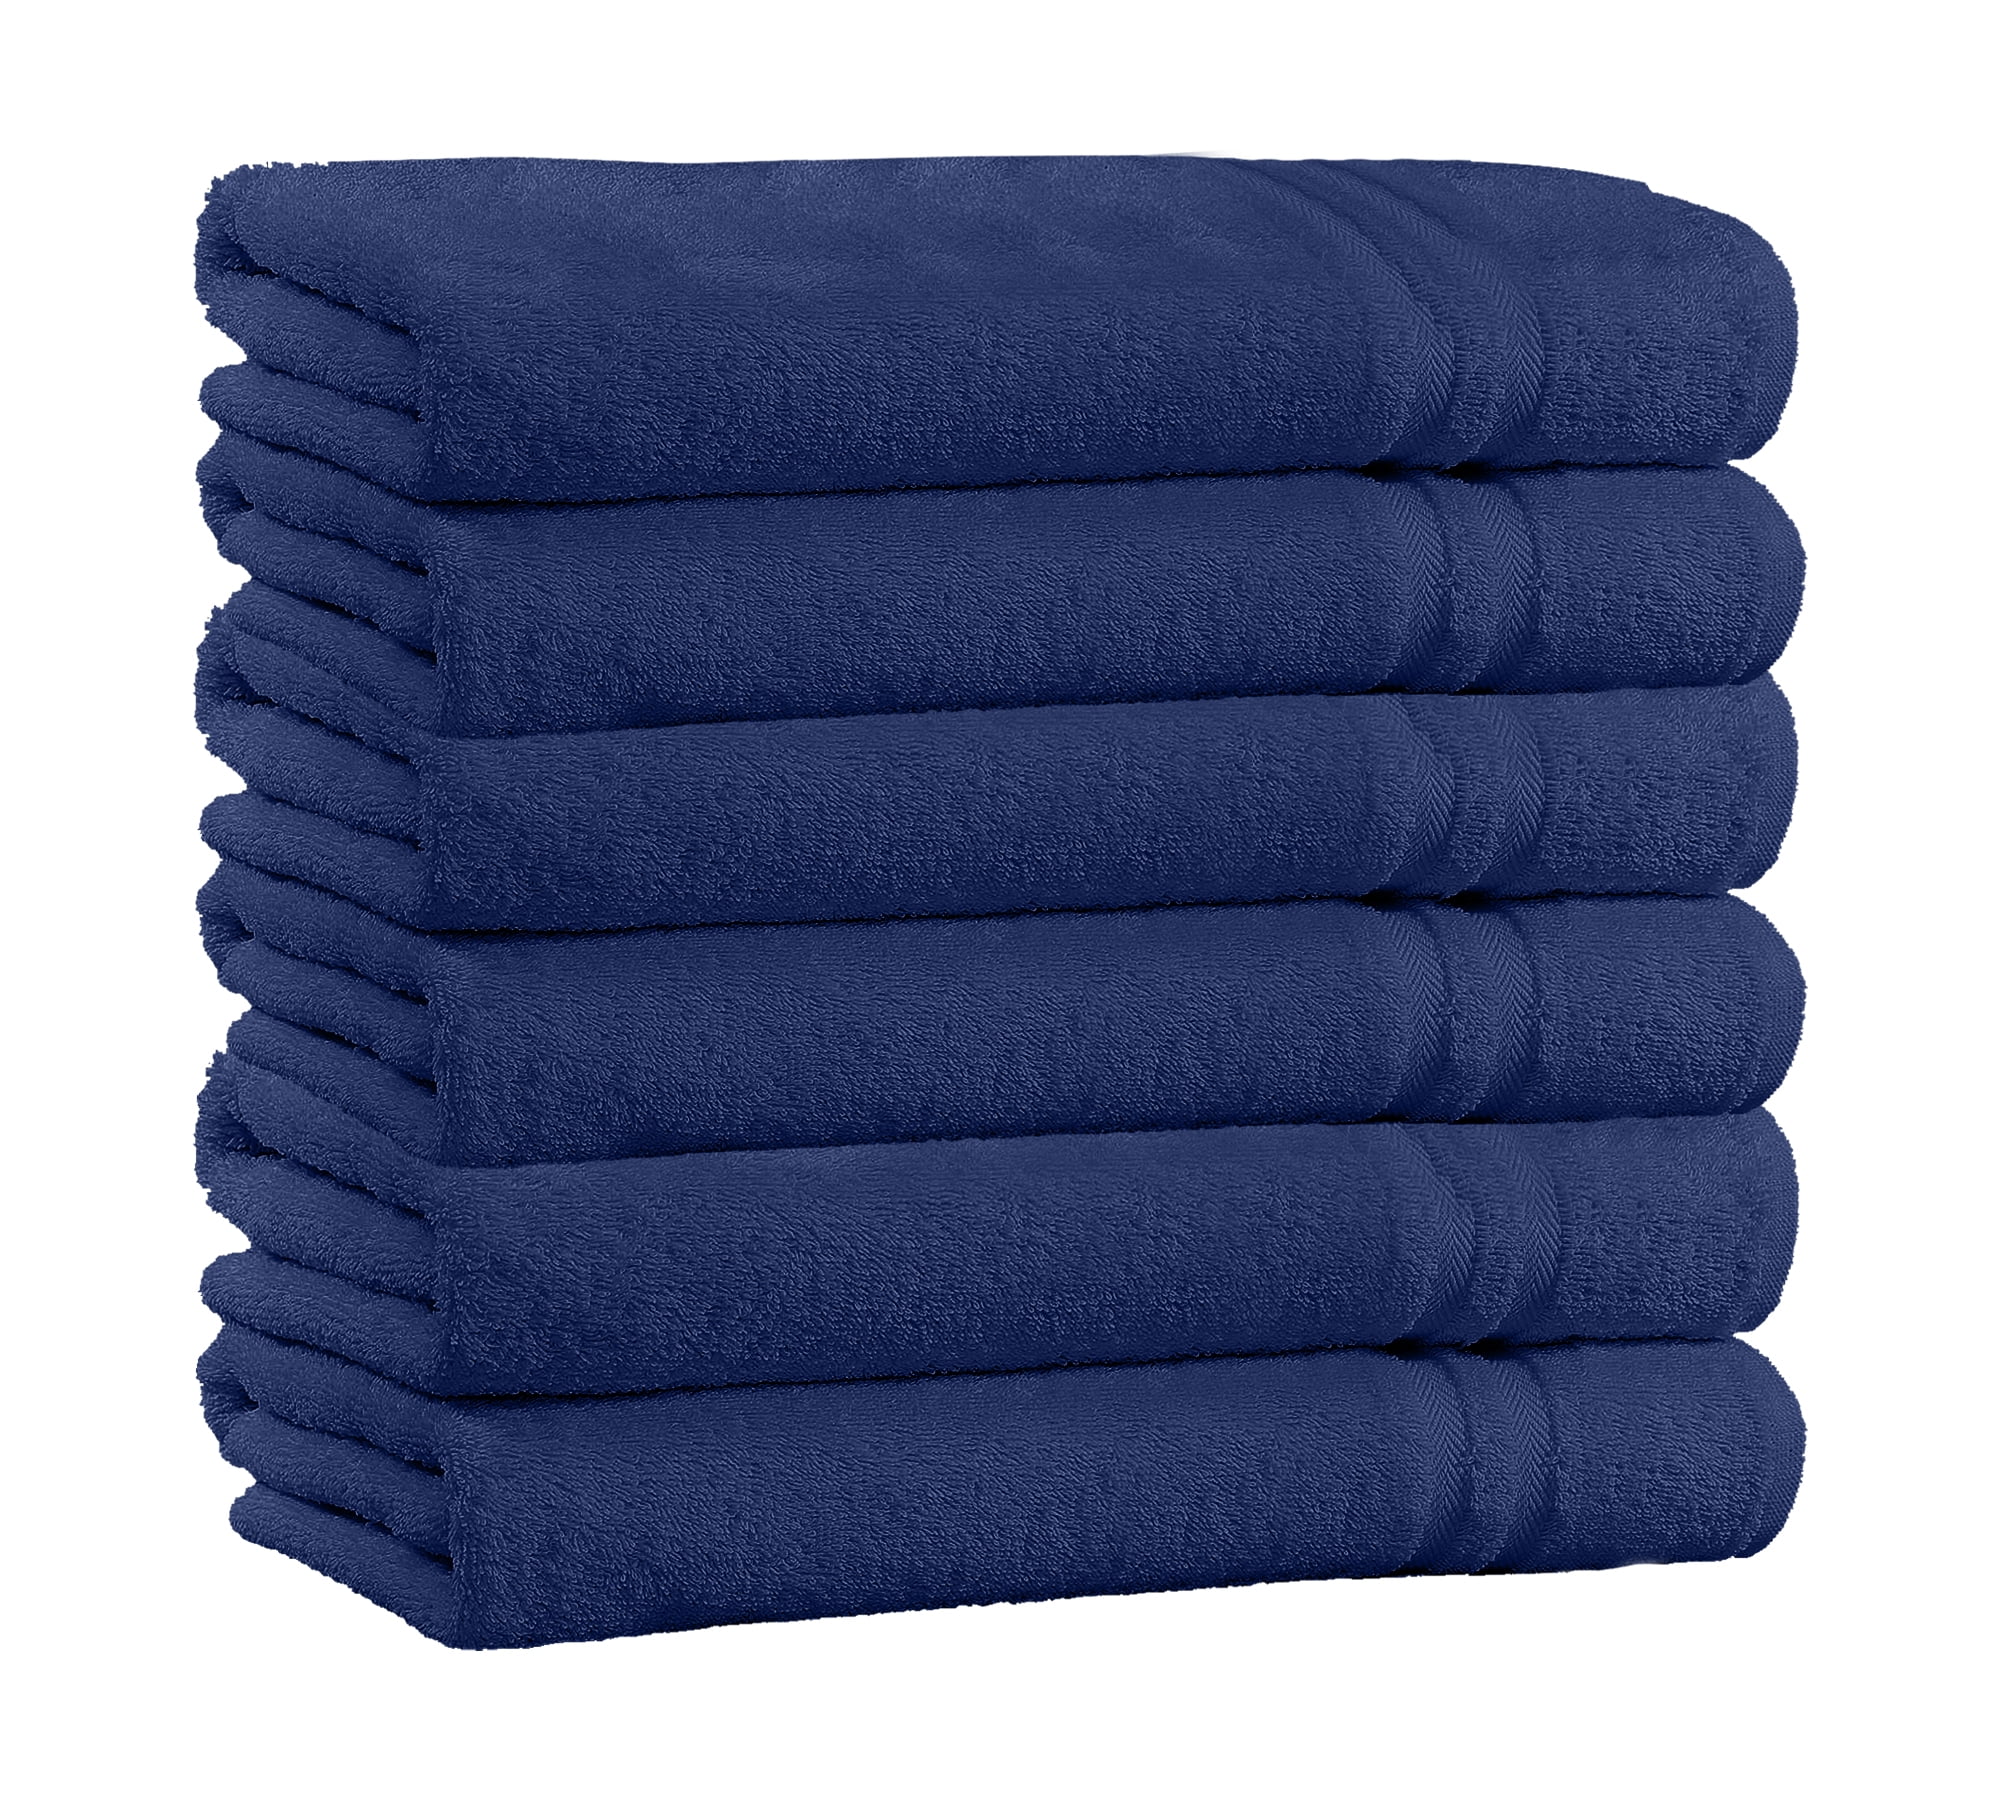 Pure100% Supima Cotton Hotel and Luxury Spa Towels 30x56" 2 Pack 